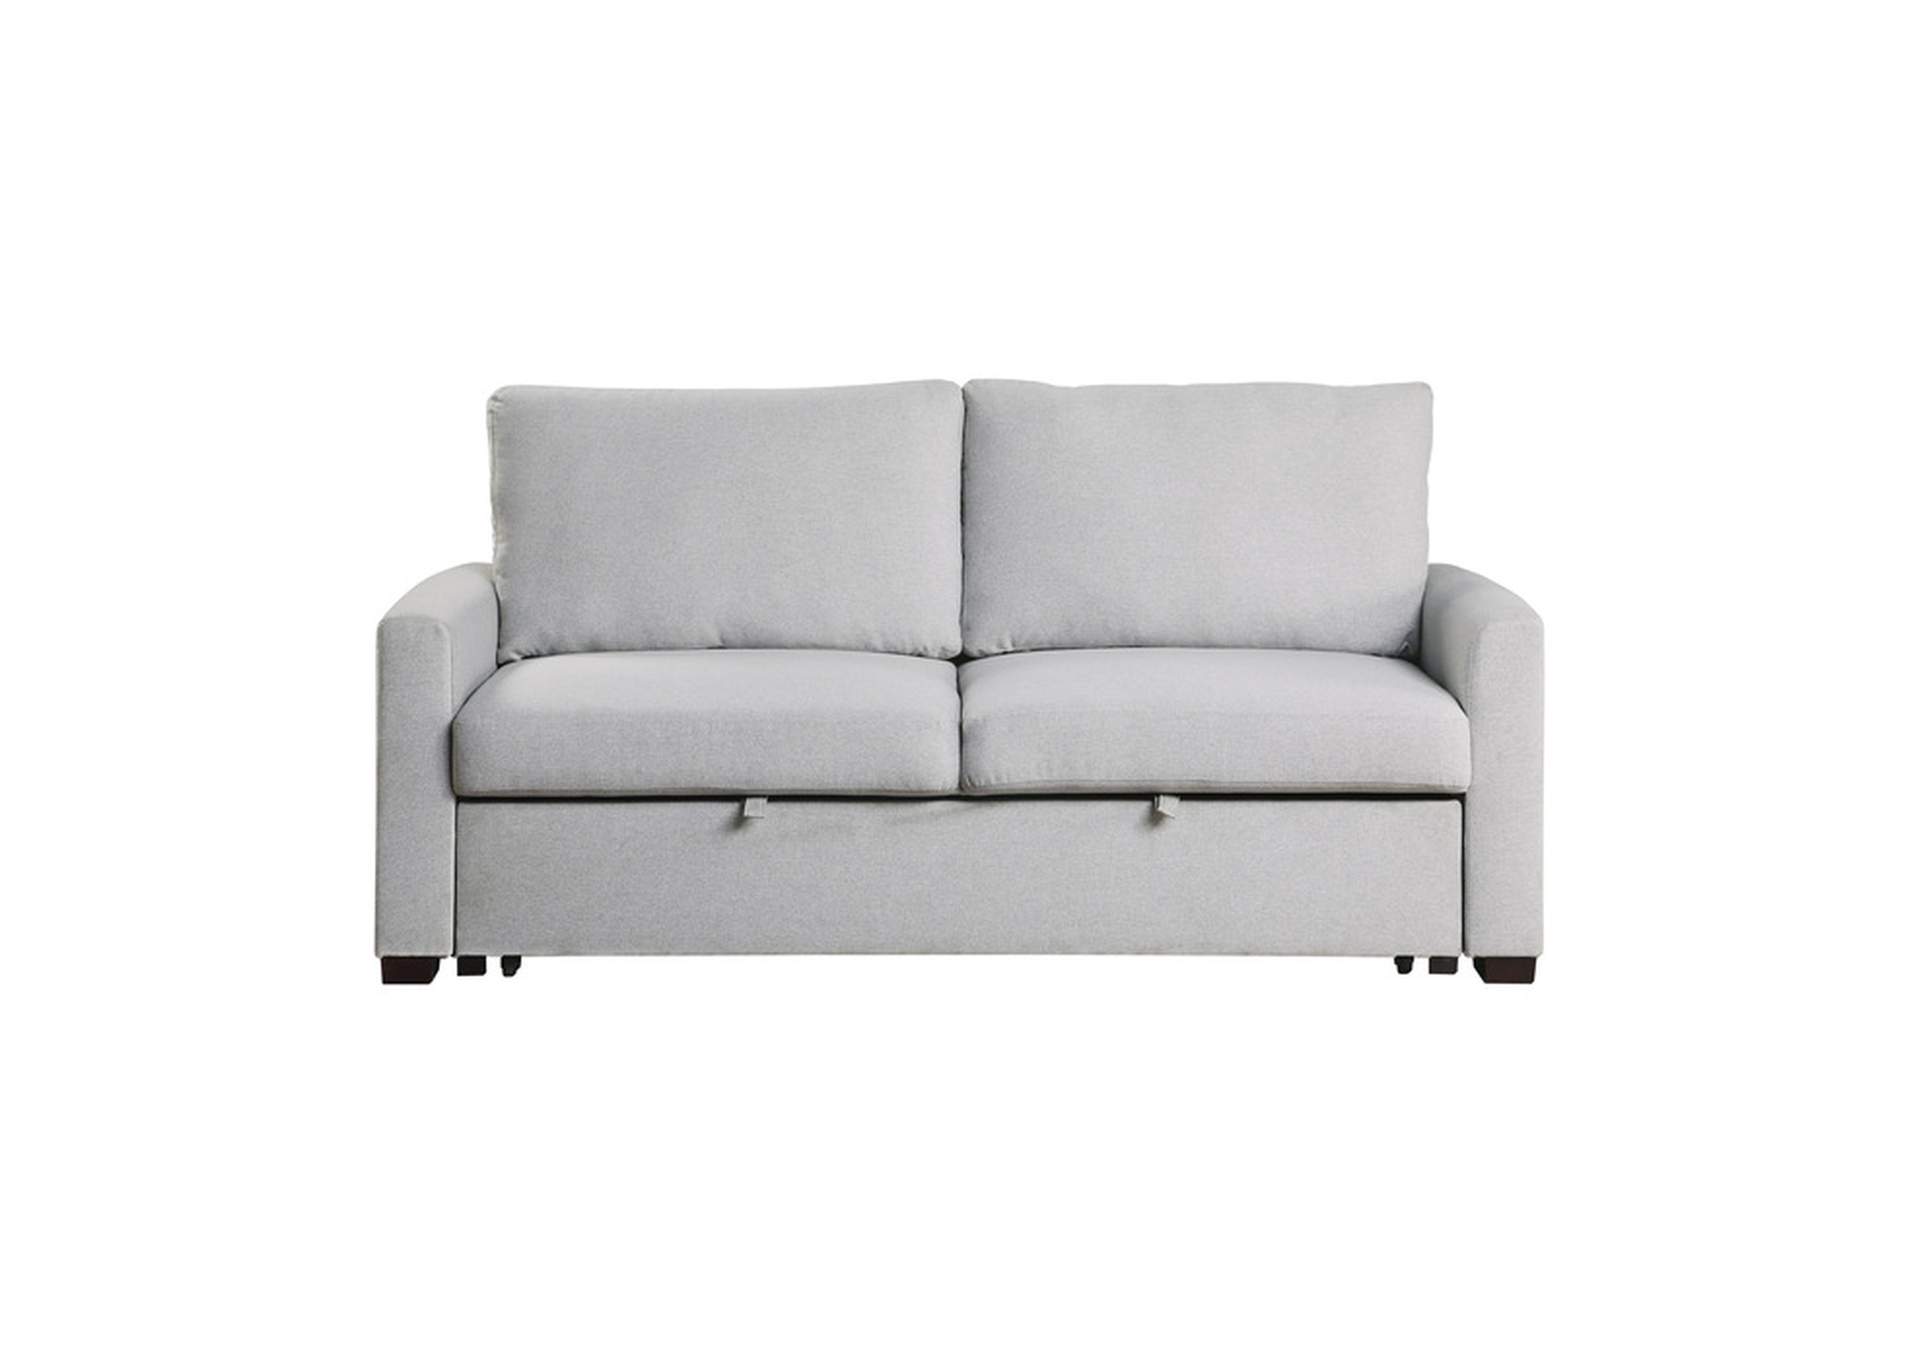 Price Convertible Studio Sofa with Pull-out Bed,Homelegance